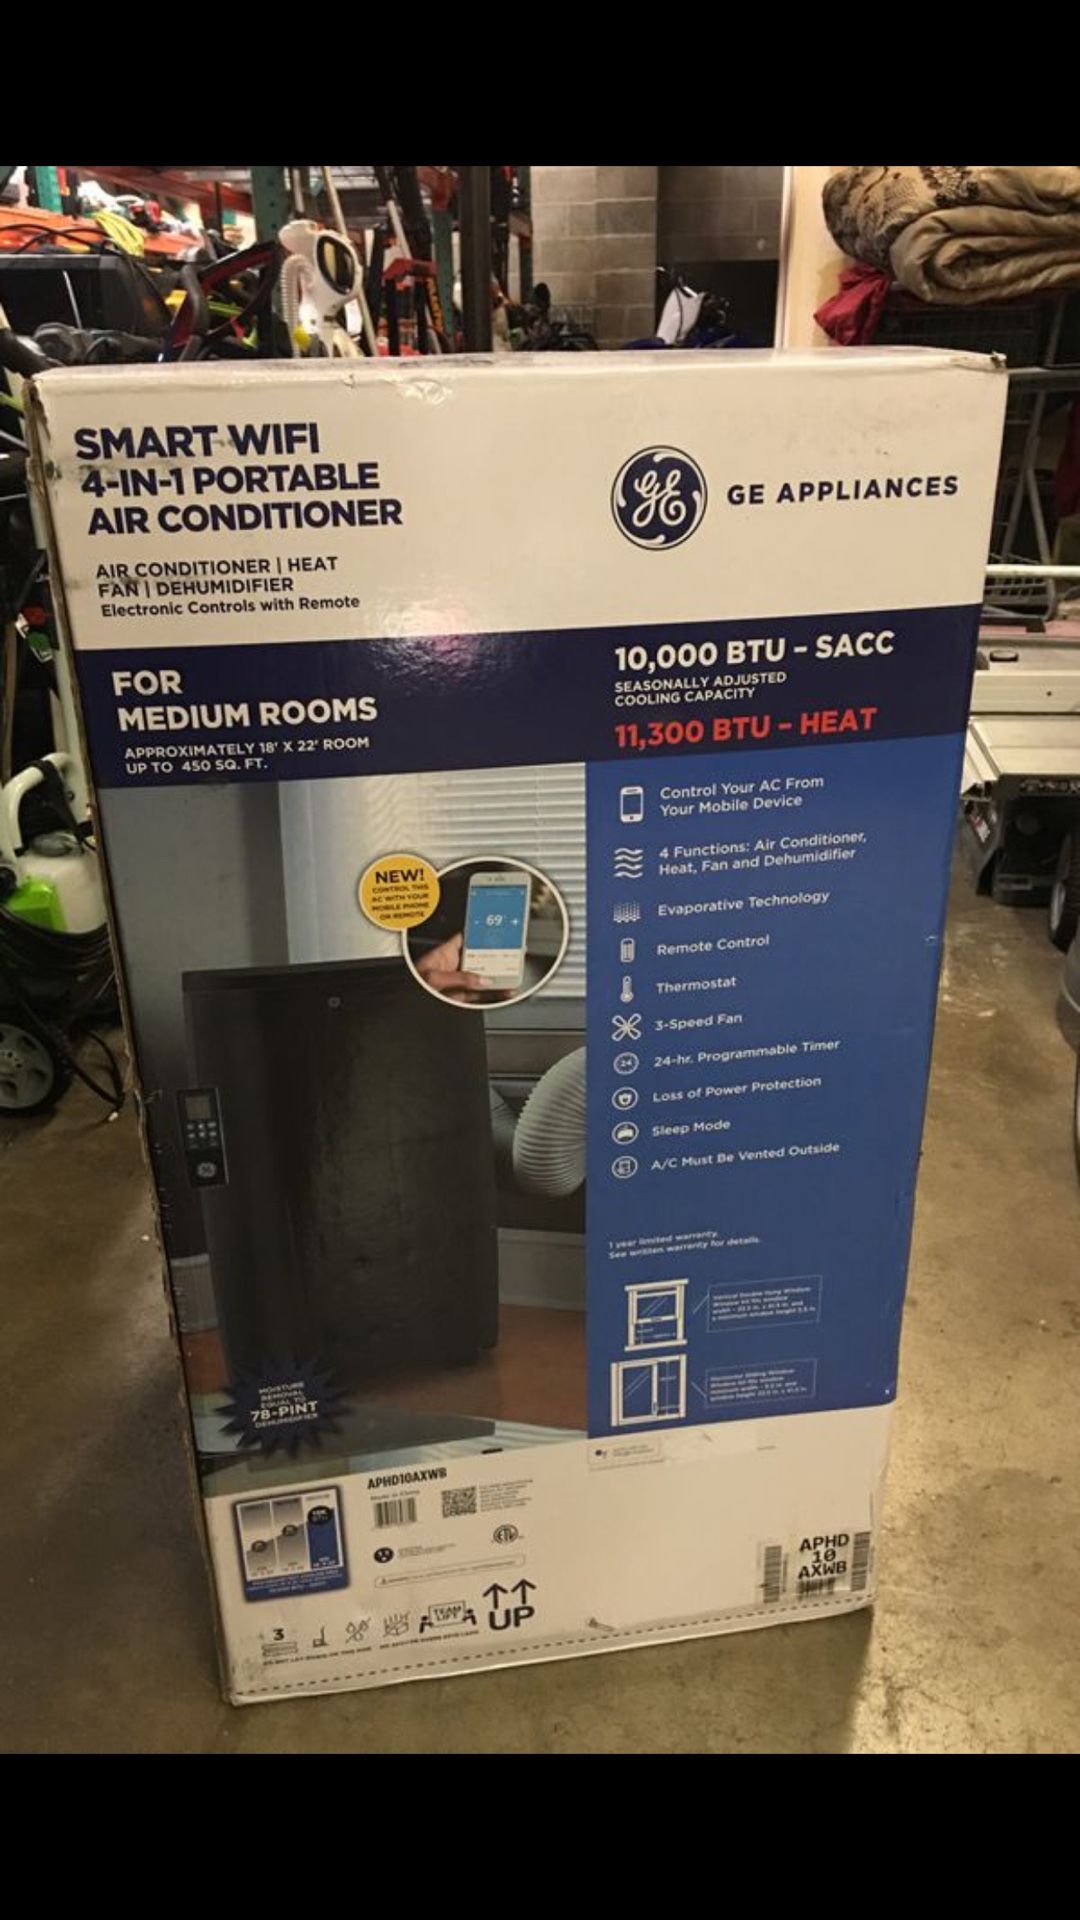 GE Smart WiFi 4-in-1 Portable 10,000 BTU Air Conditioner with 11,300 BTU Heater, Fan, and Dehumidifier. Brand New. Cash only